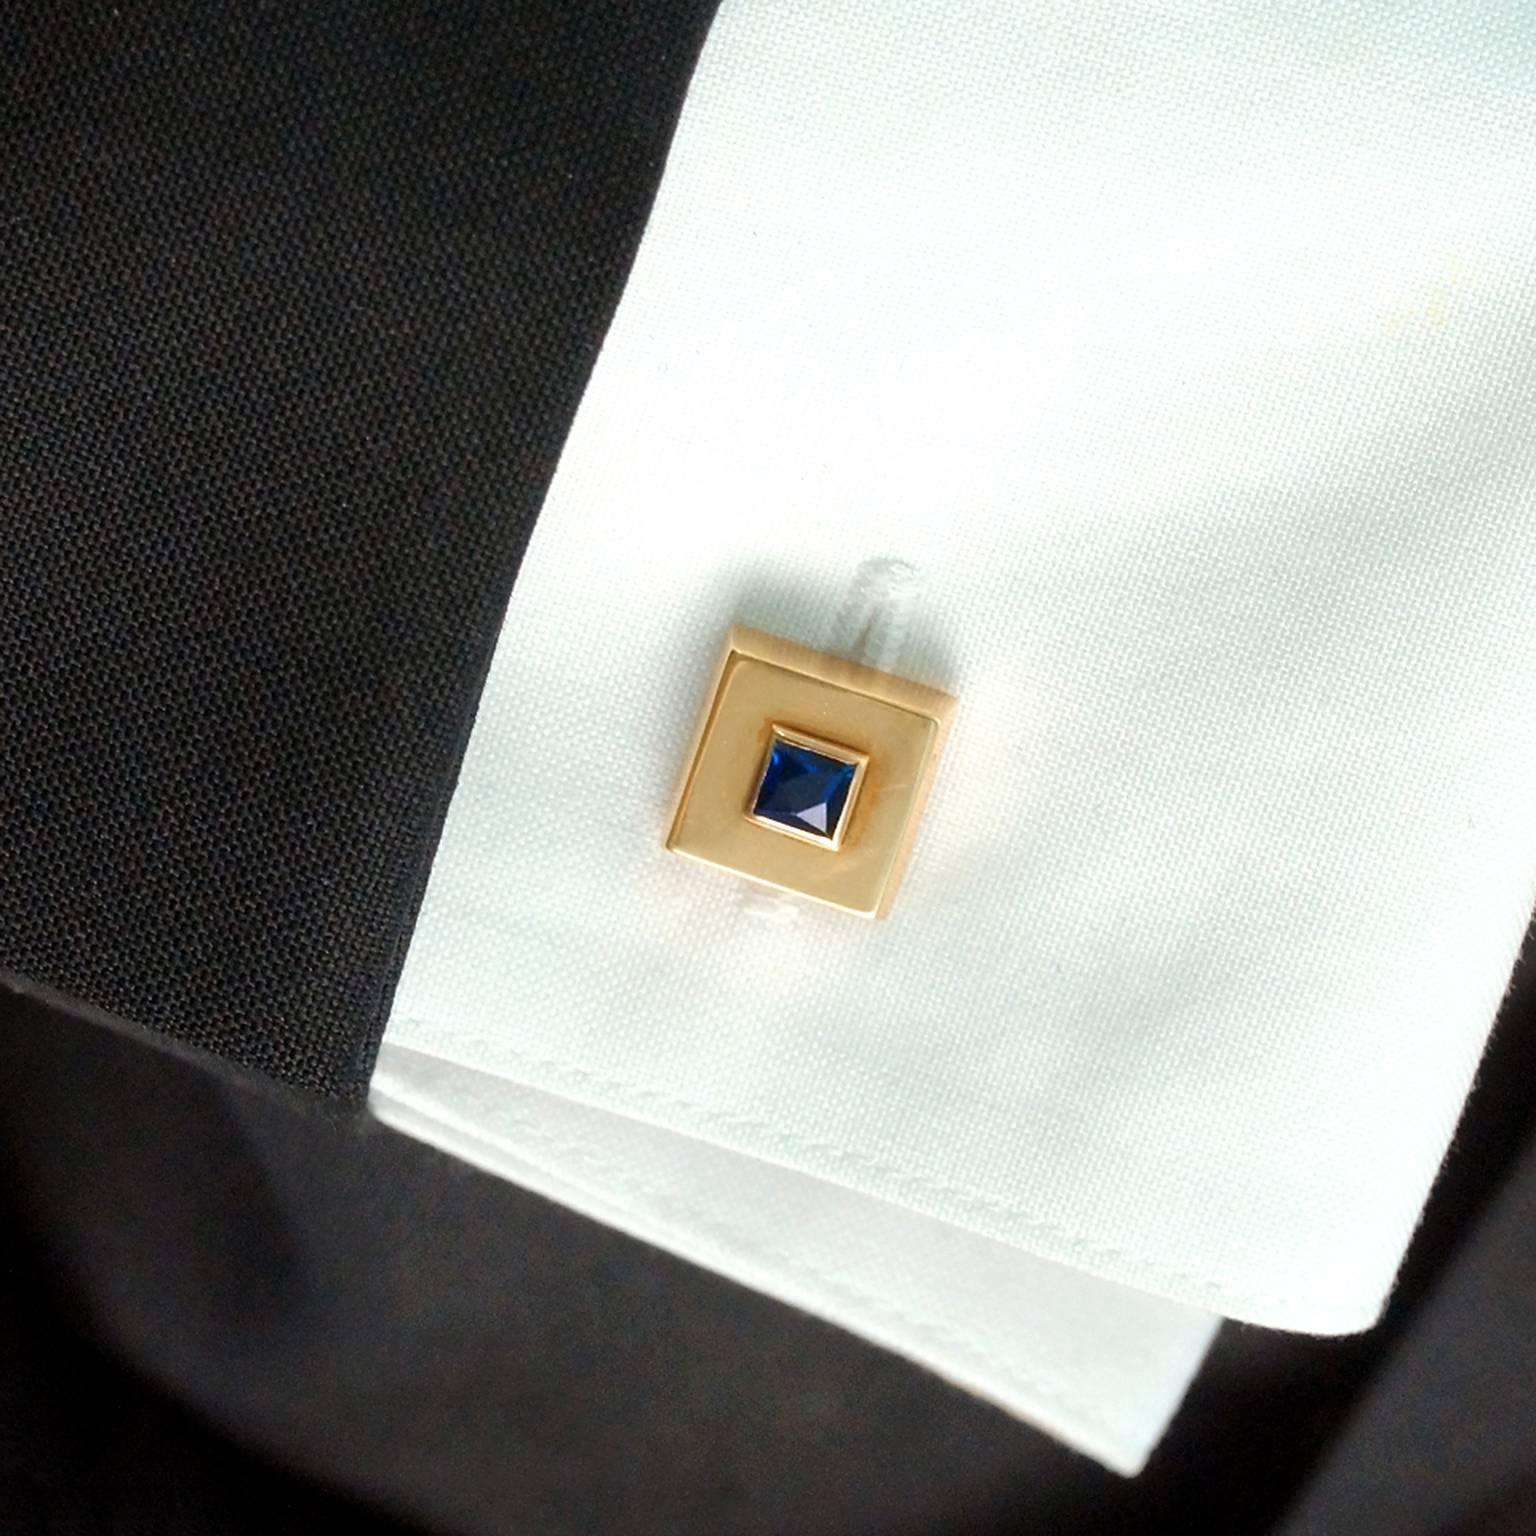 Circa 1950s, 18k, by Mellerio, Paris, France. These eighteen-karat gold cufflinks from the renowned house of Mellerio are set with superb navy blue French-cut sapphires. Their style is impeccably Parisian and their fabrication exquisite. Excellent